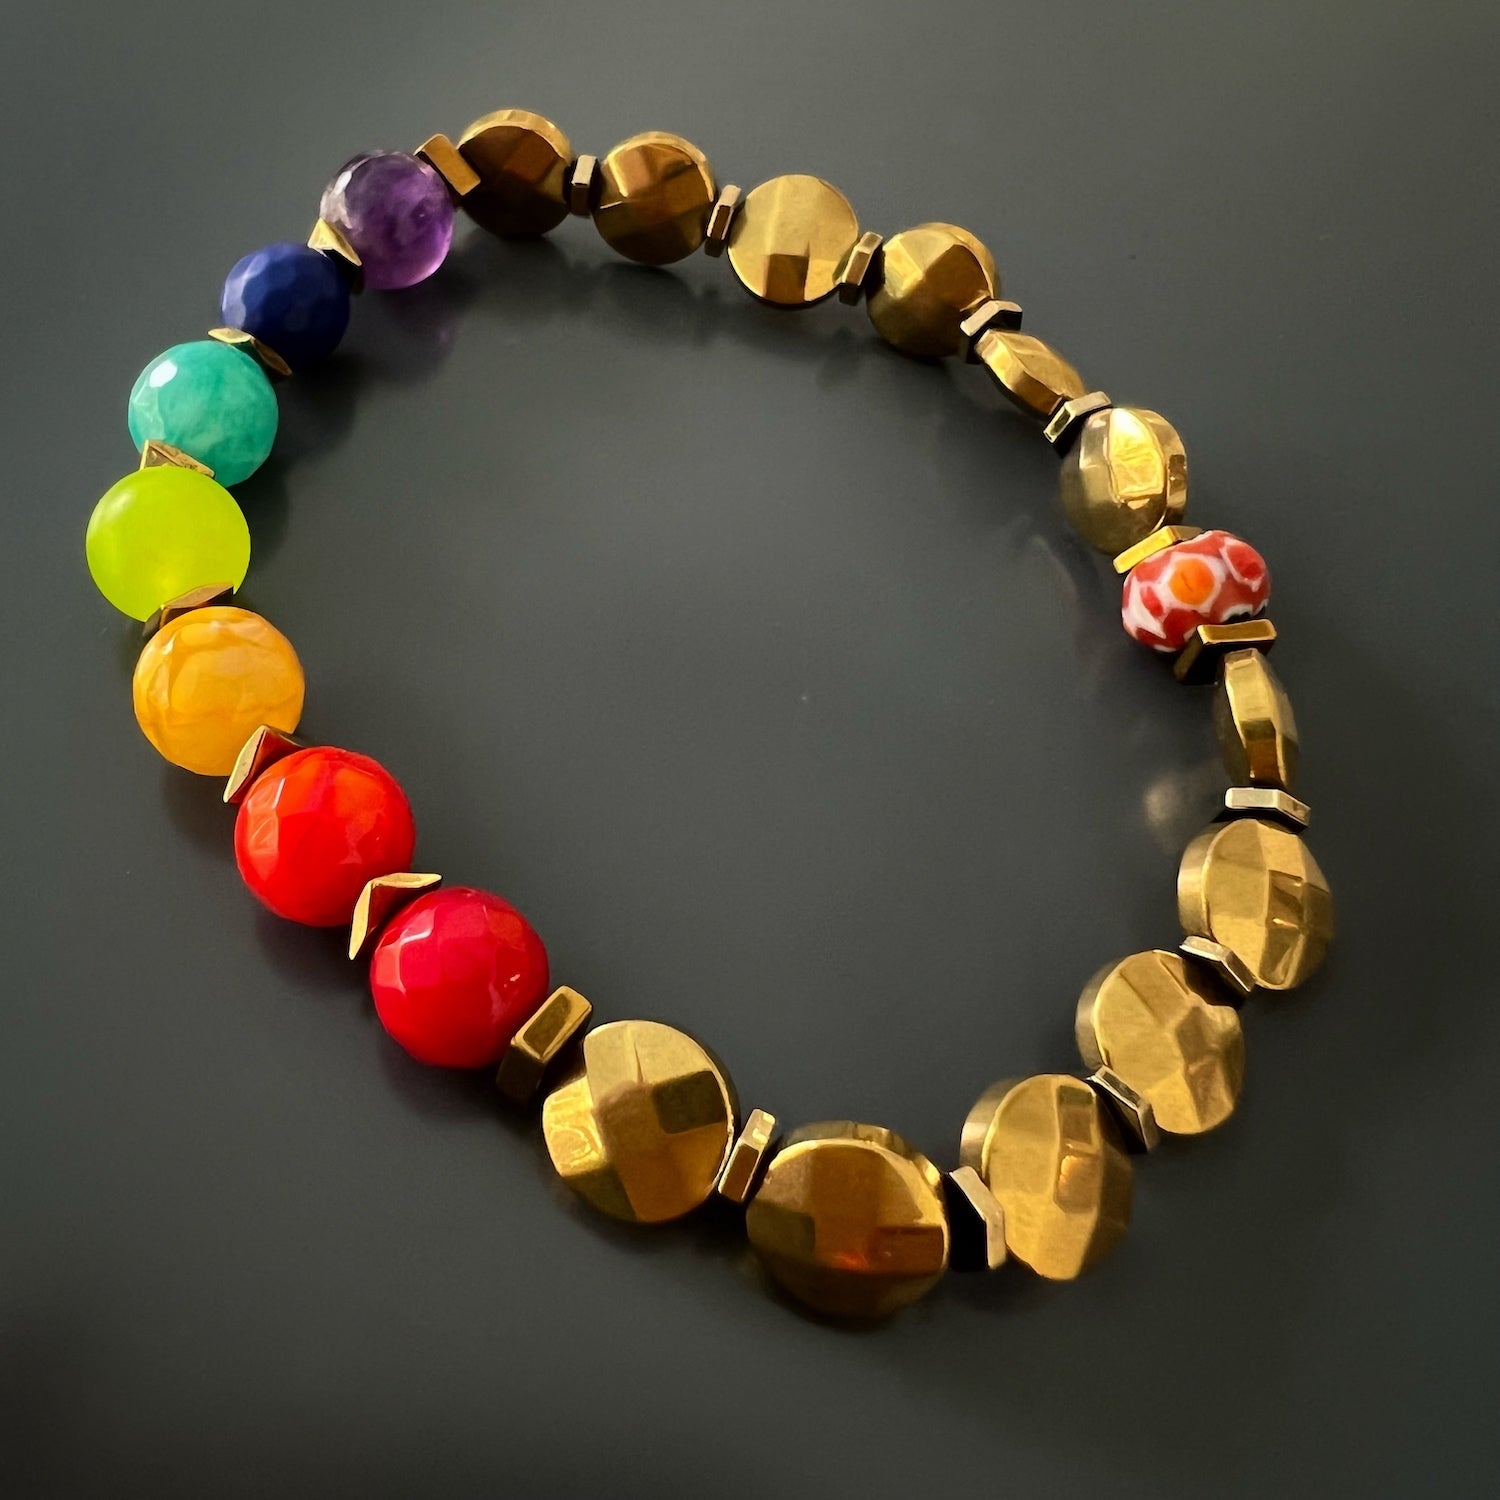 Chakra Balance Bracelet featuring Hematite stone spacers, providing grounding and stability to support chakra alignment.